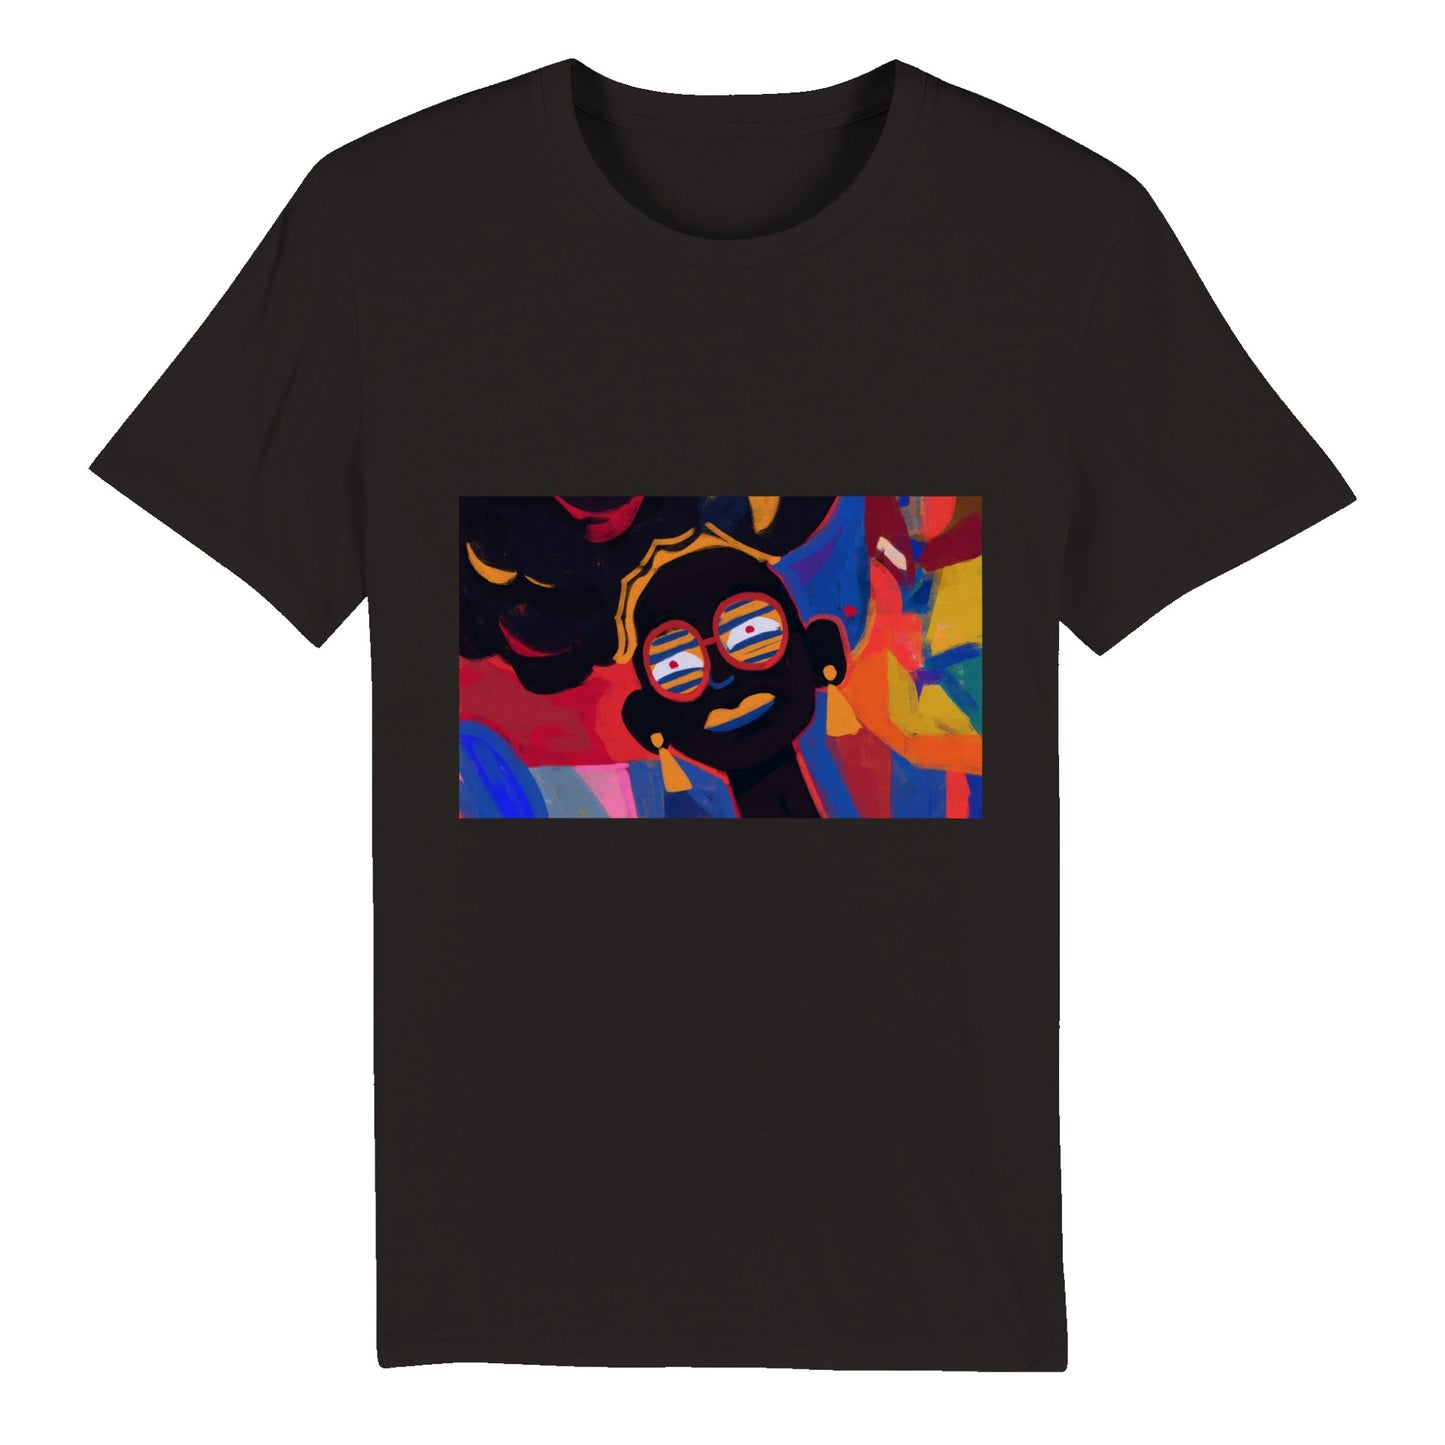 100% Organic Unisex T-shirt/Abstract-Afro